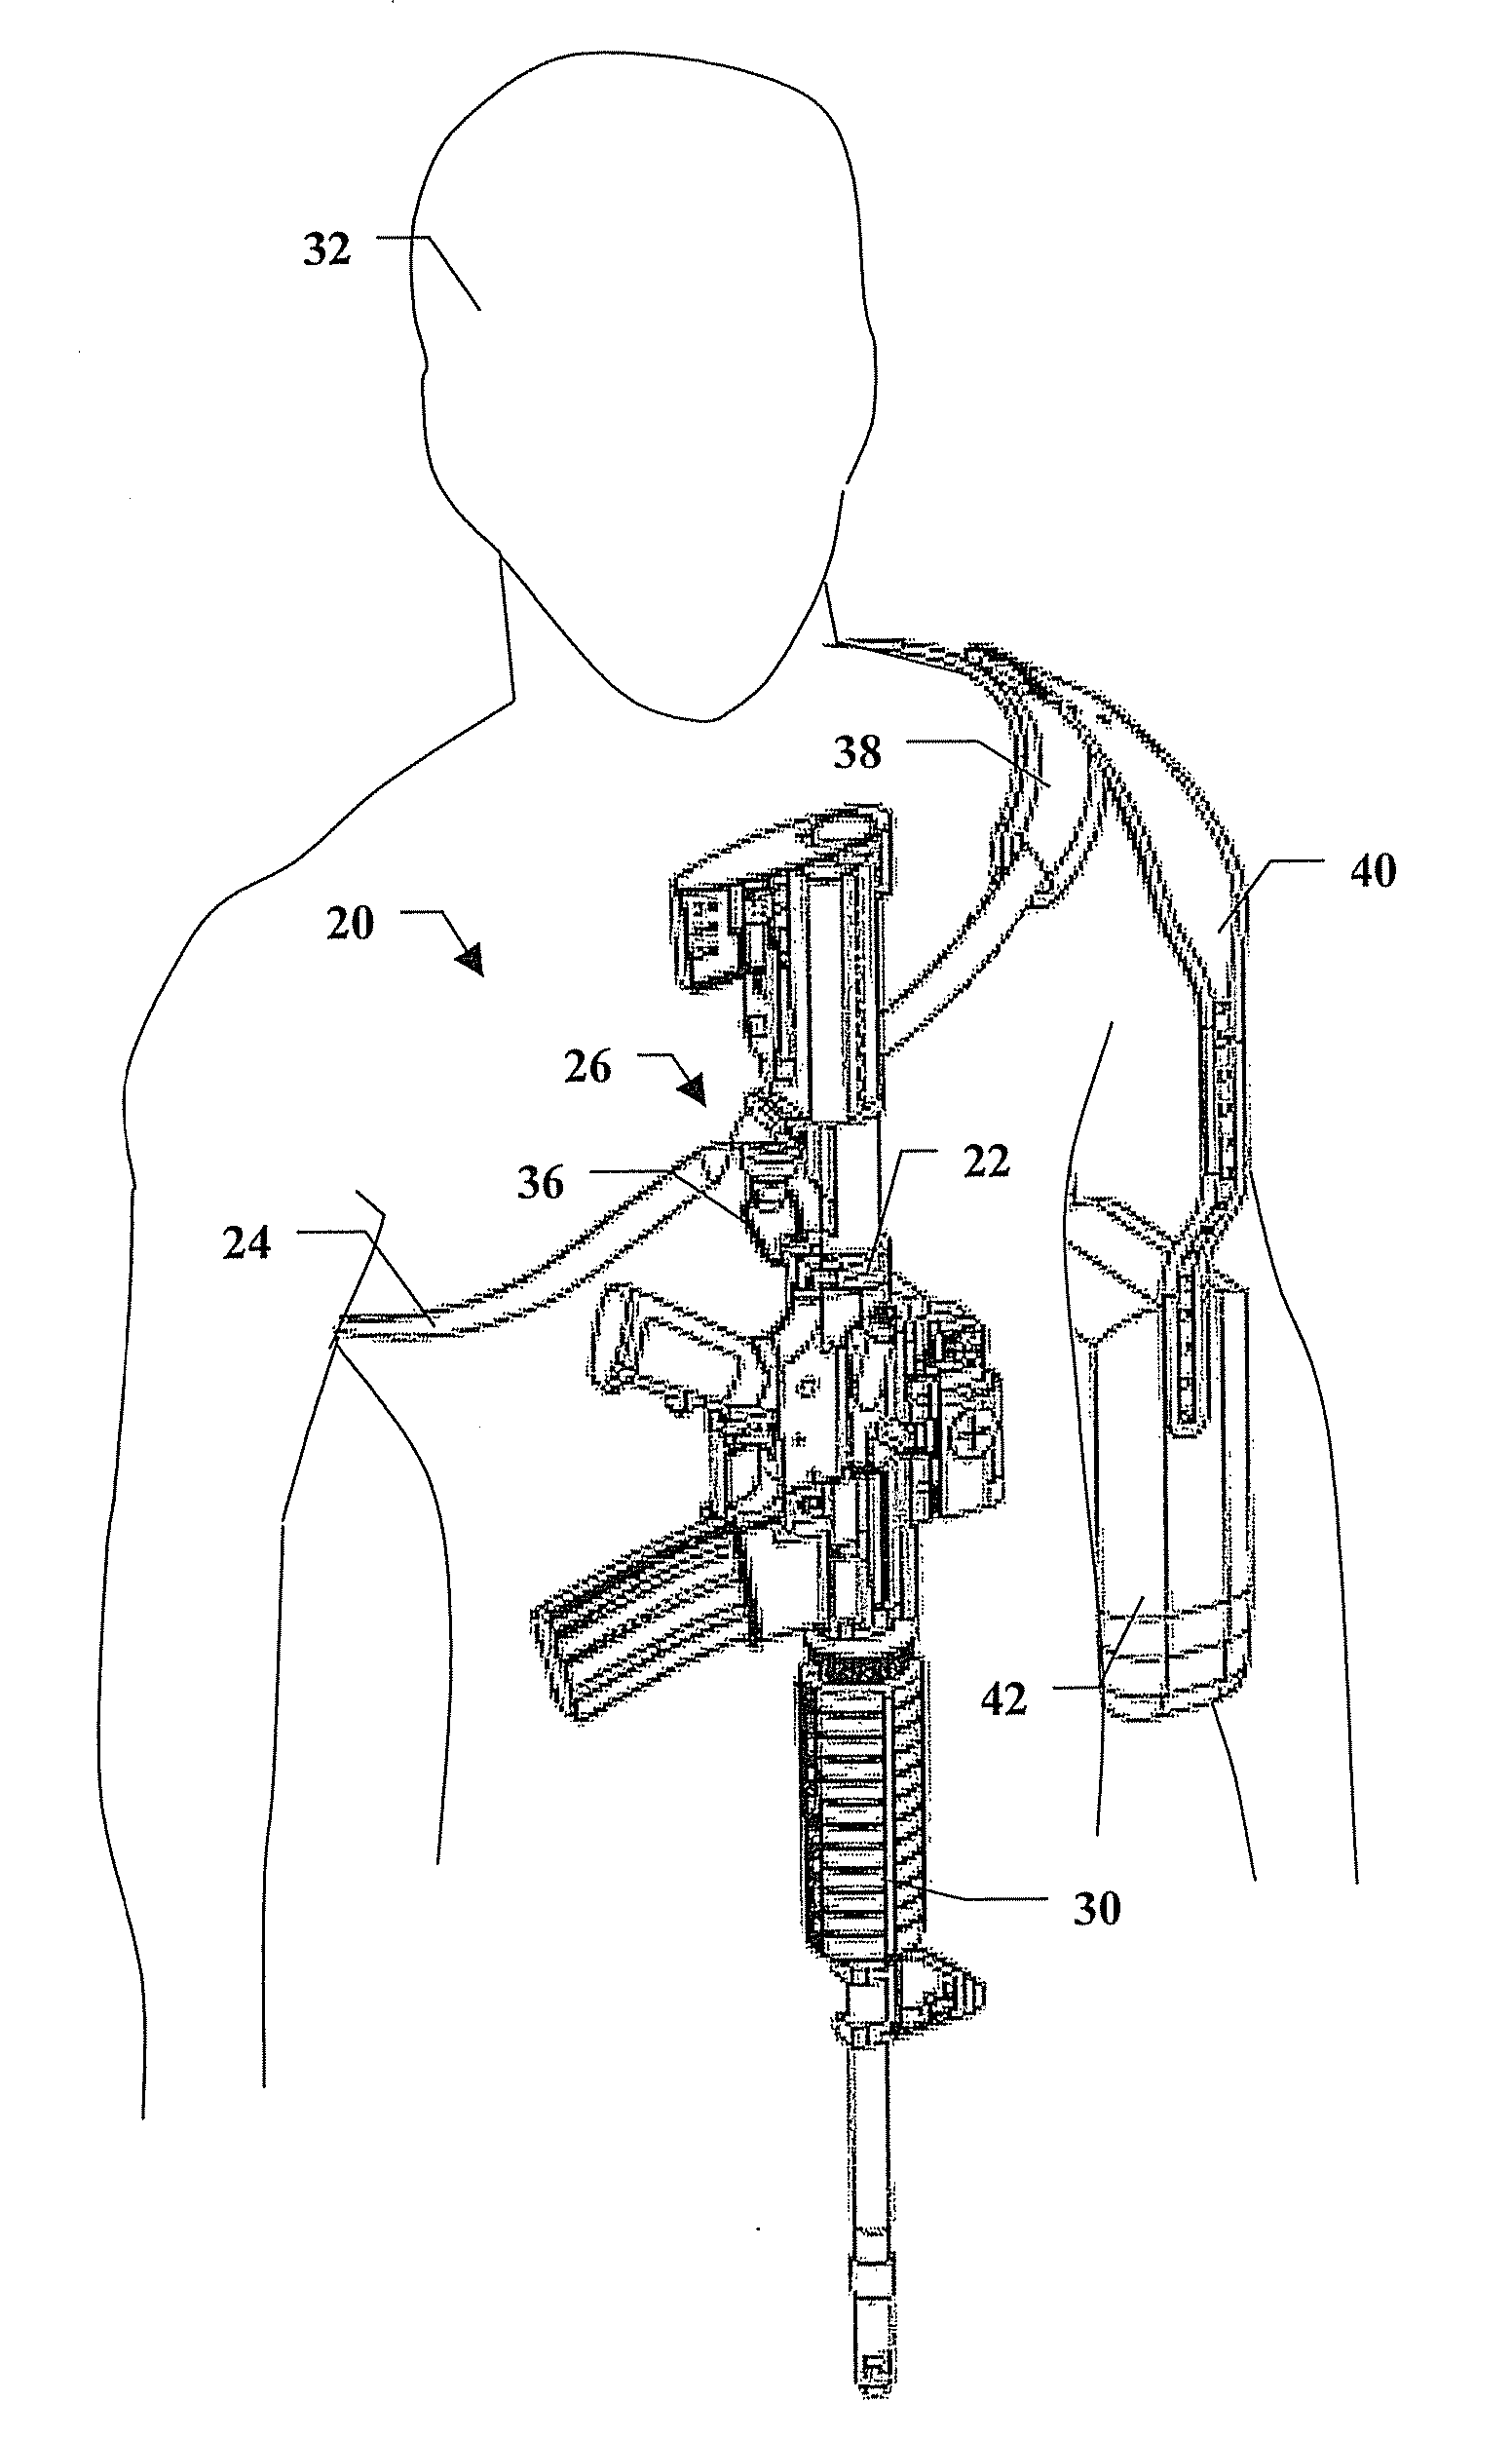 Firearm sling assembly, related mechanisms and methods